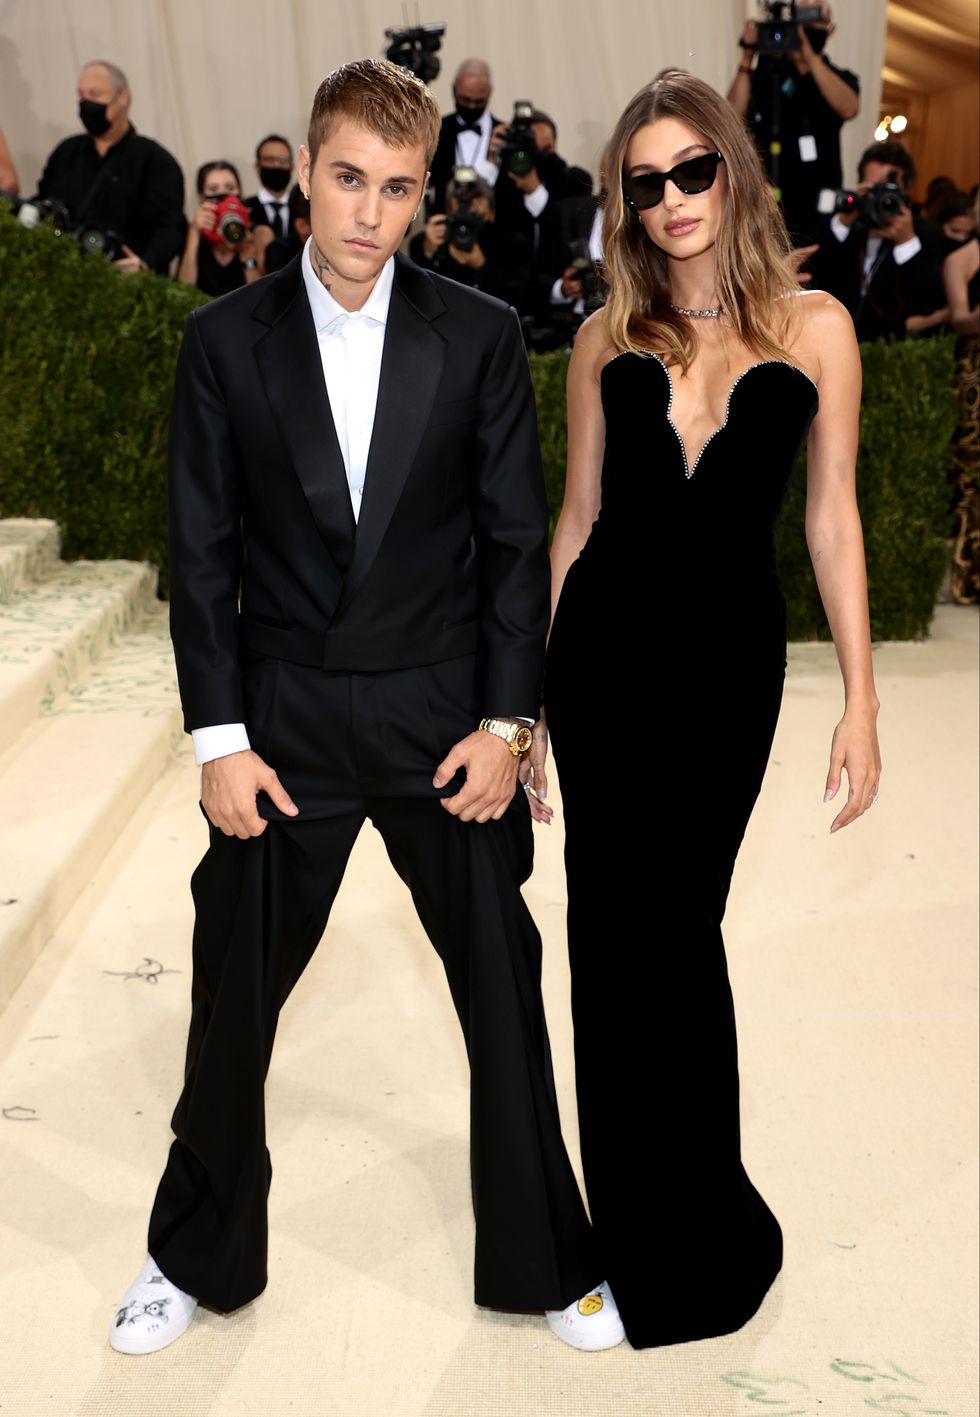 new york, new york september 13 justin bieber and hailey bieber attend the 2021 met gala celebrating in america a lexicon of fashion at metropolitan museum of art on september 13, 2021 in new york city photo by dimitrios kambourisgetty images for the met museumvogue